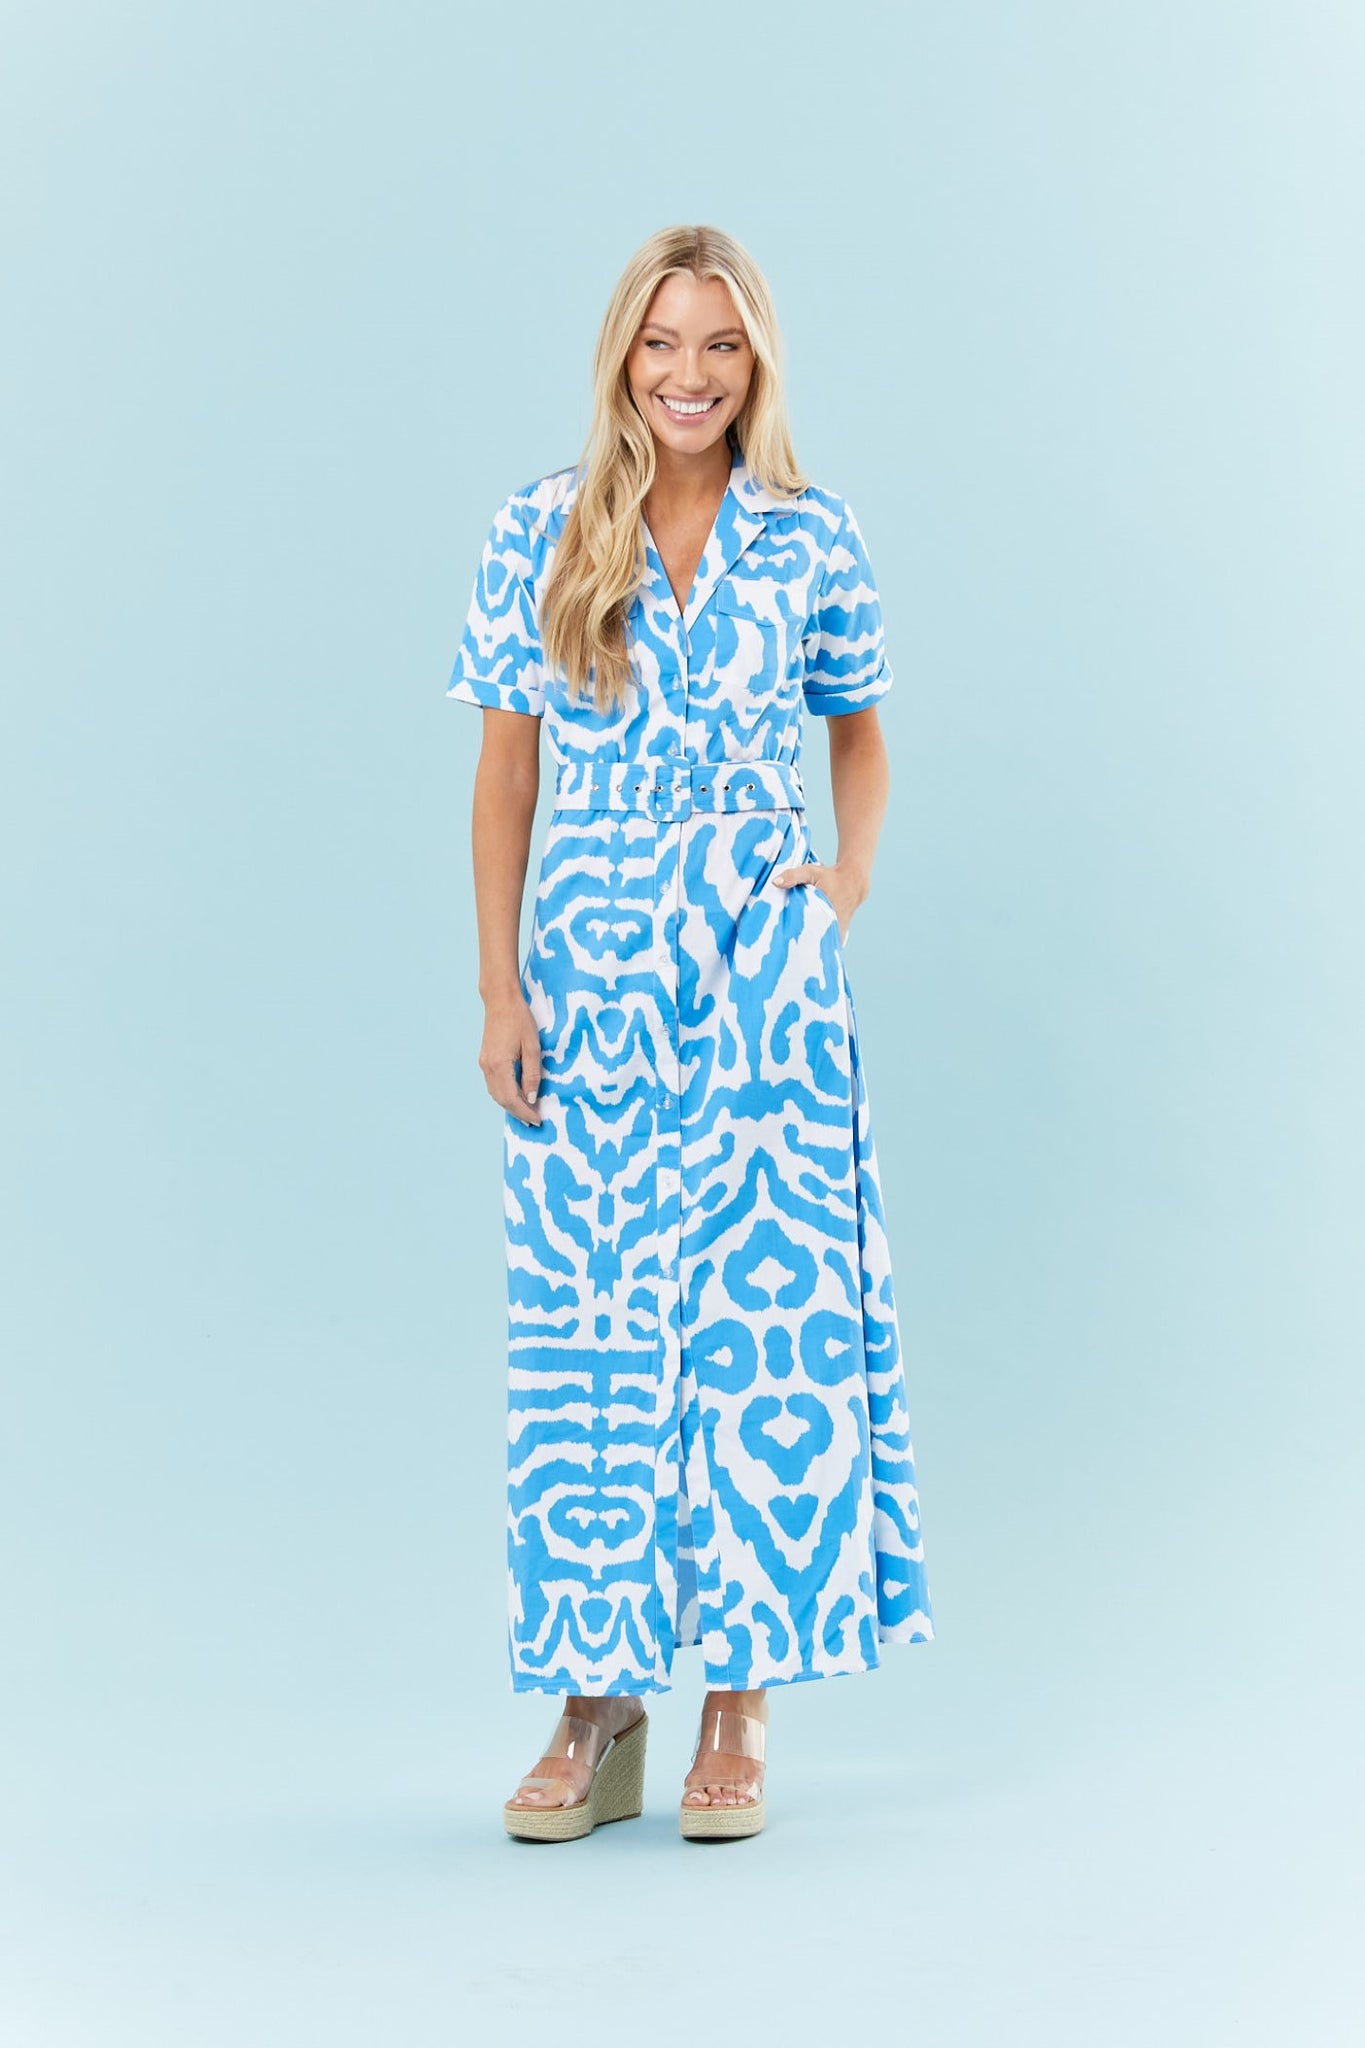 Haskell Dress in Sky Blue Tiger